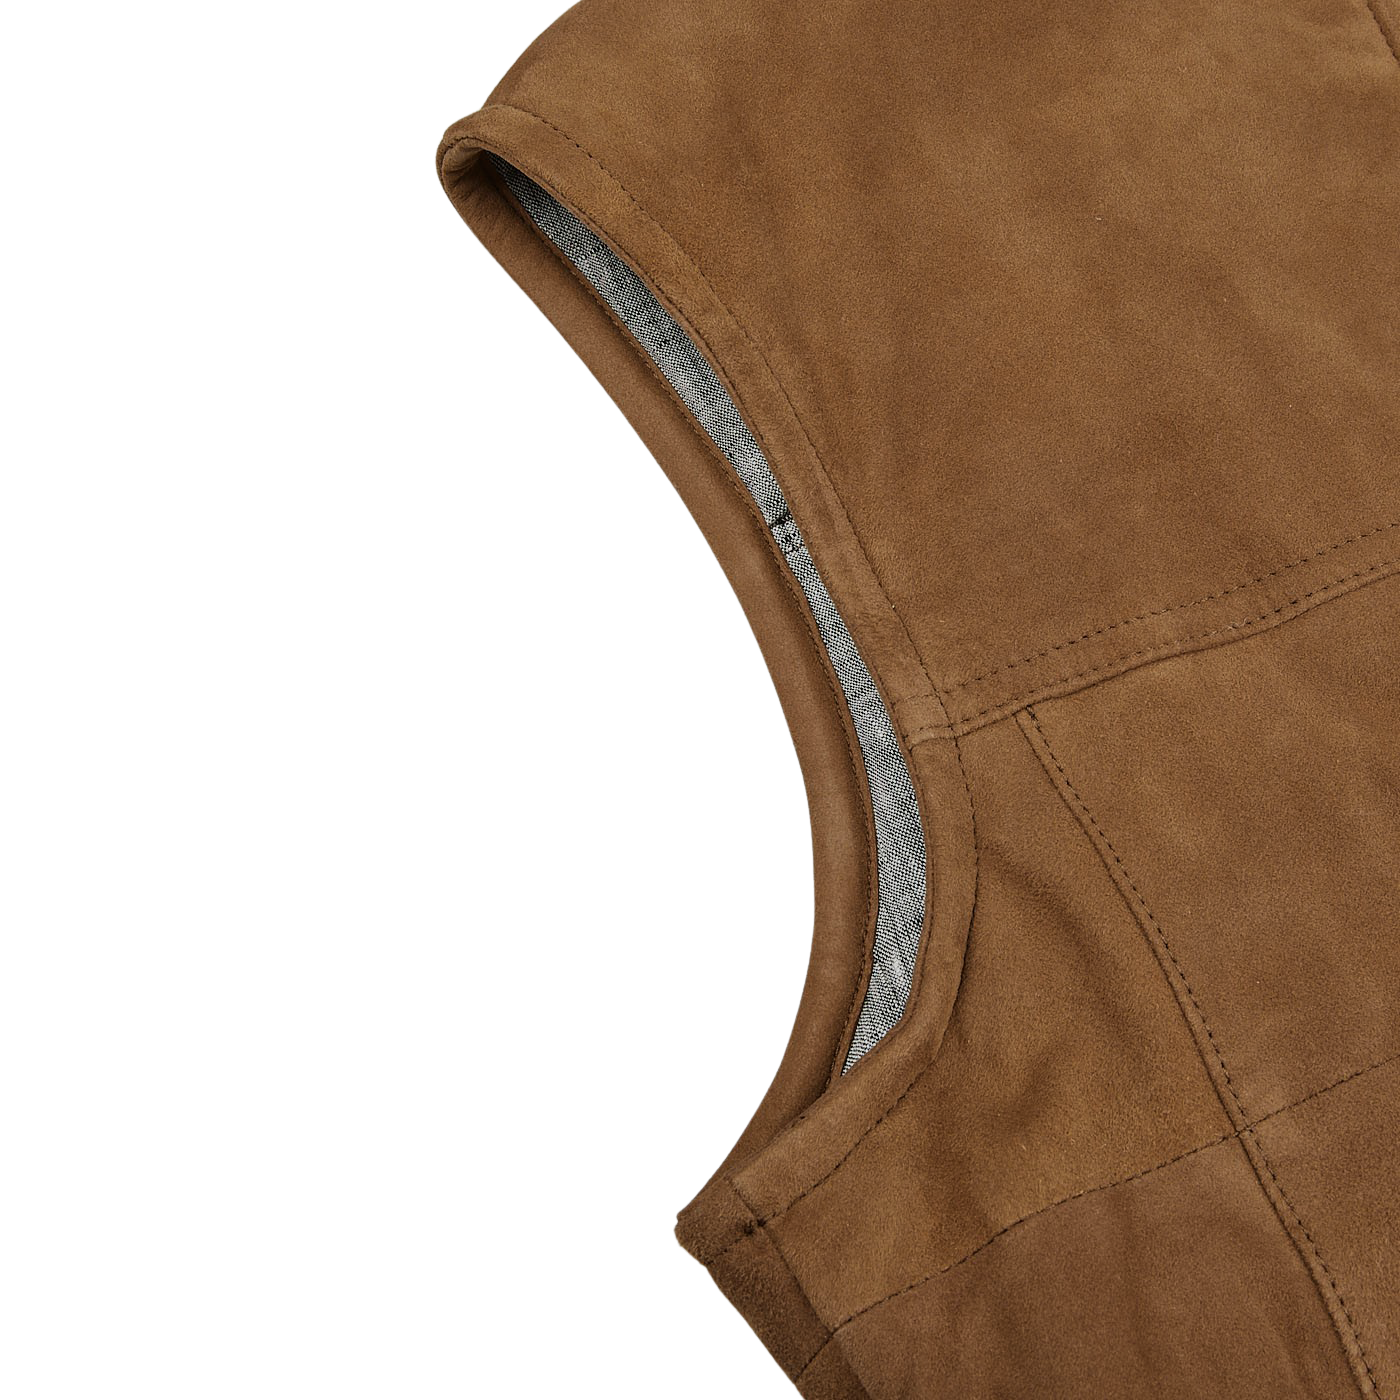 A Tobacco Brown Suede Leather Alberto Gilet by Werner Christ on a white surface.